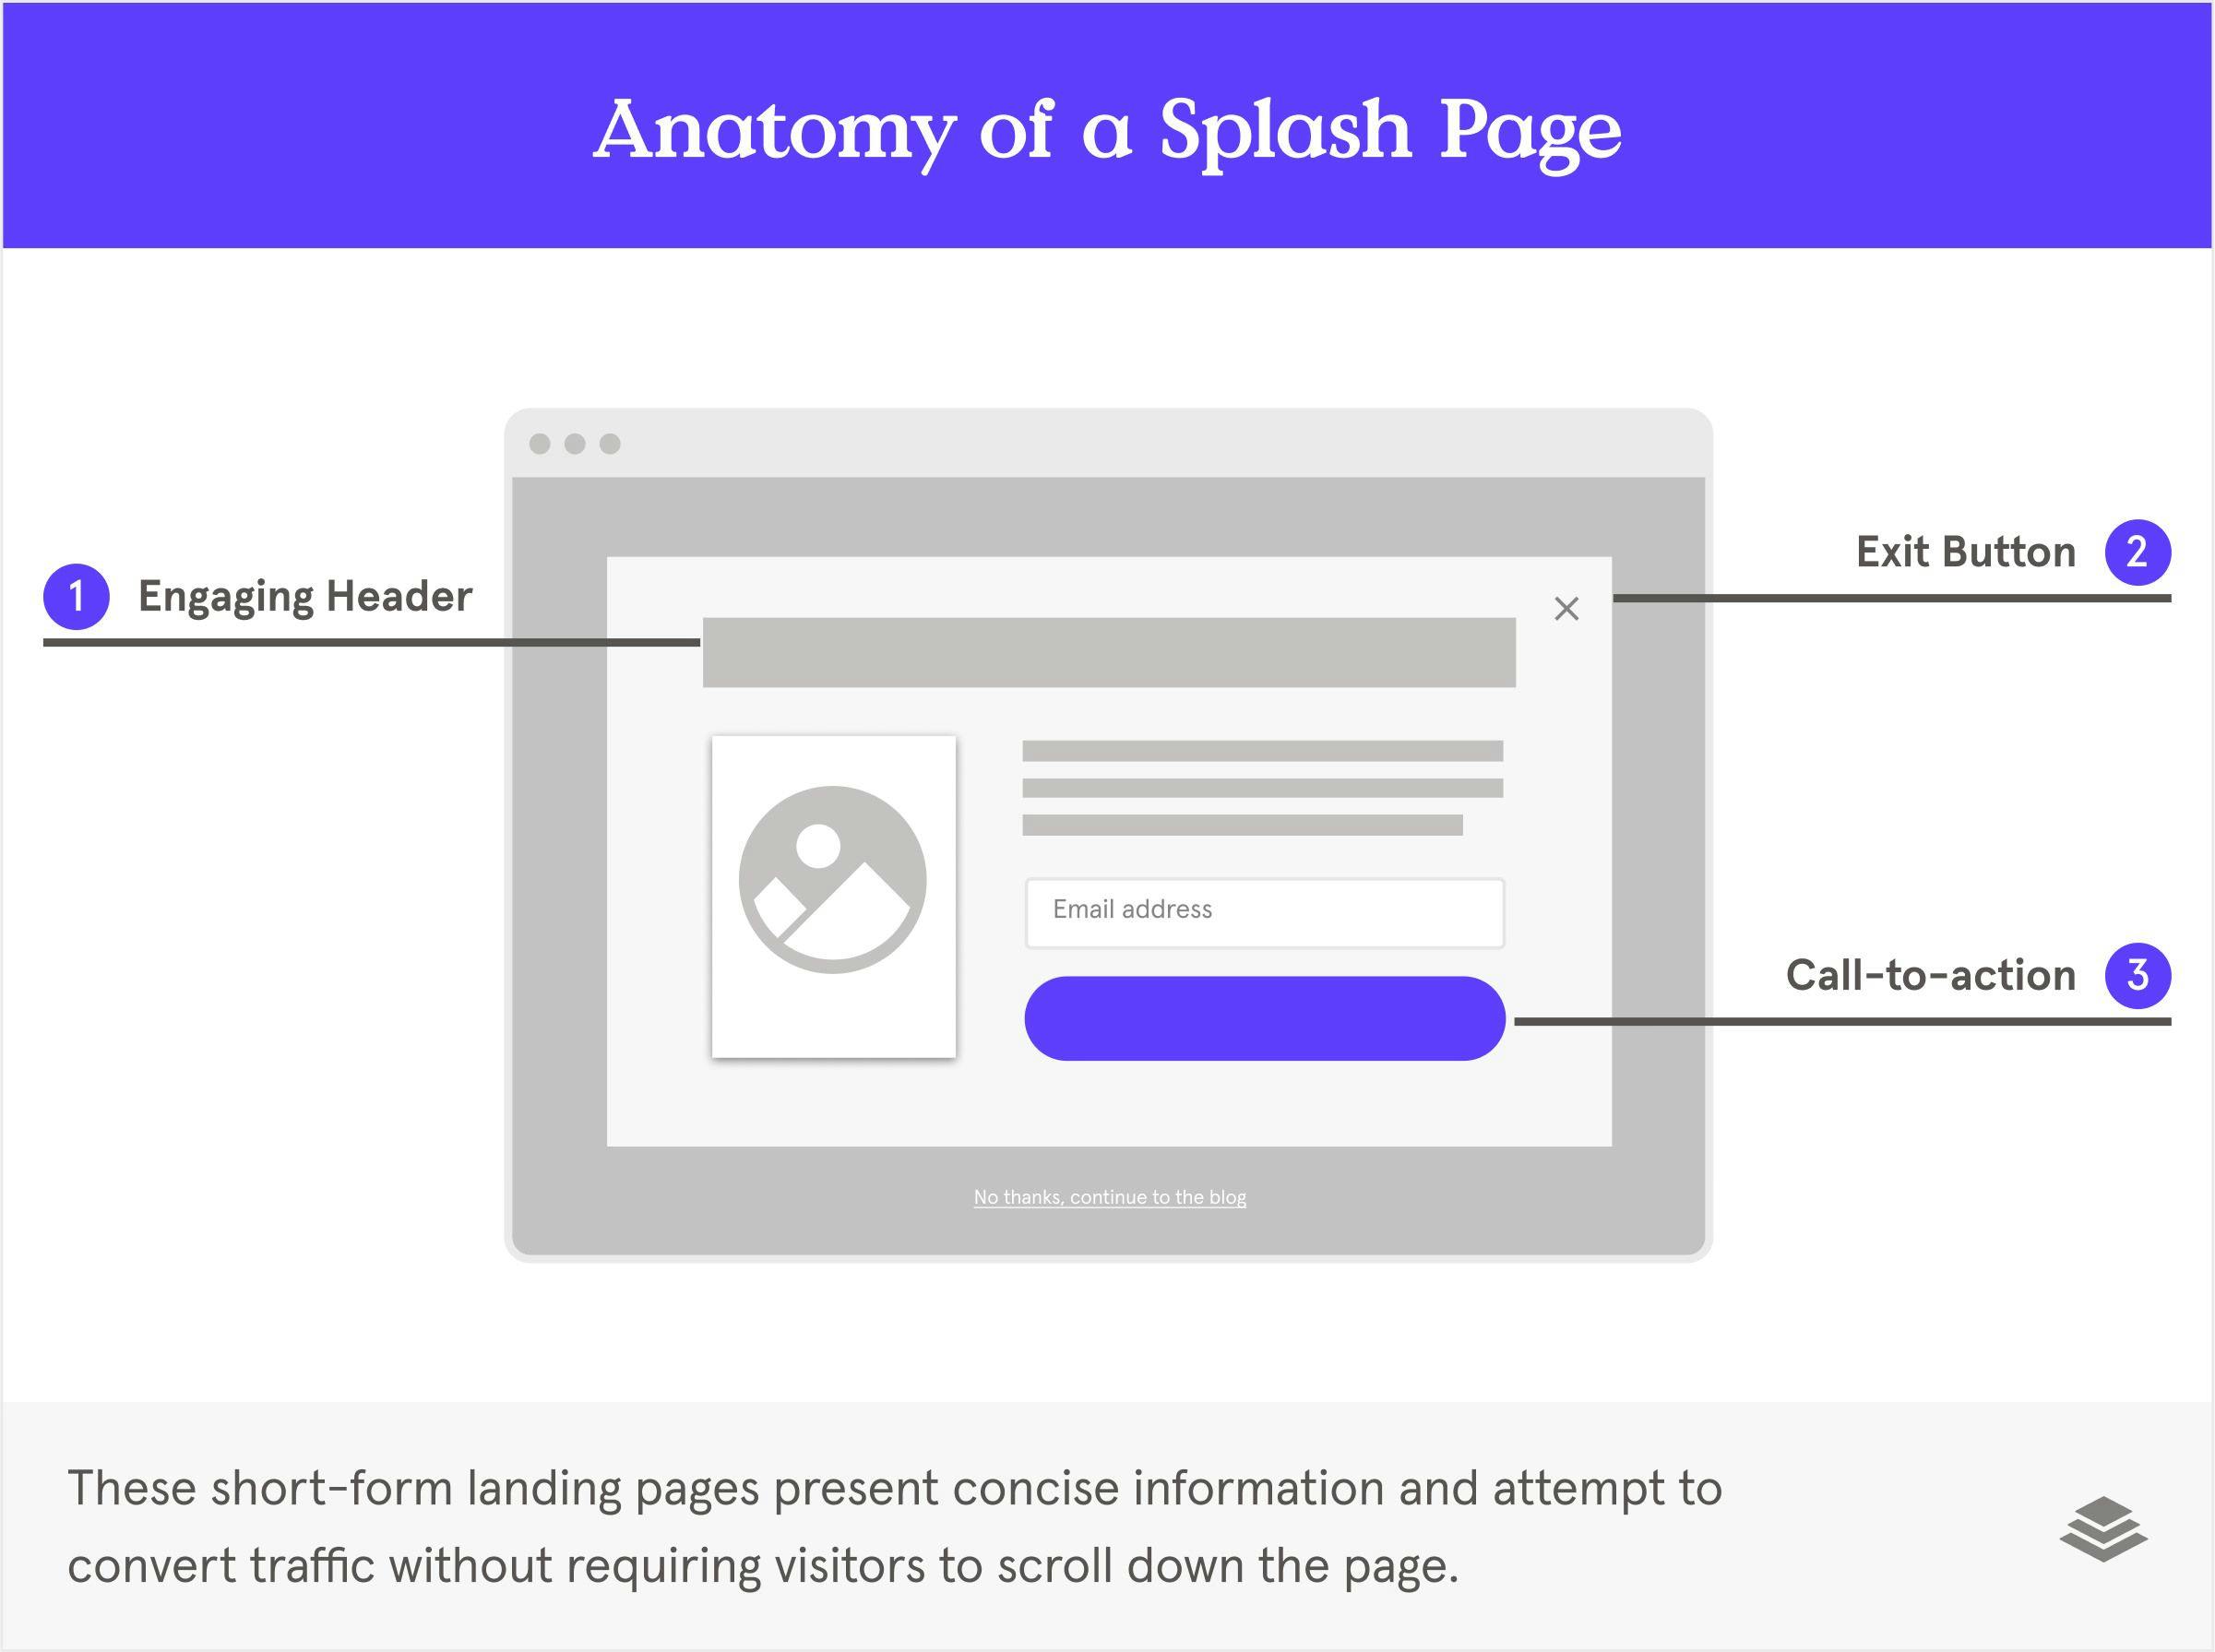 Anatomy of a splash page: header, call-to-action, exit button